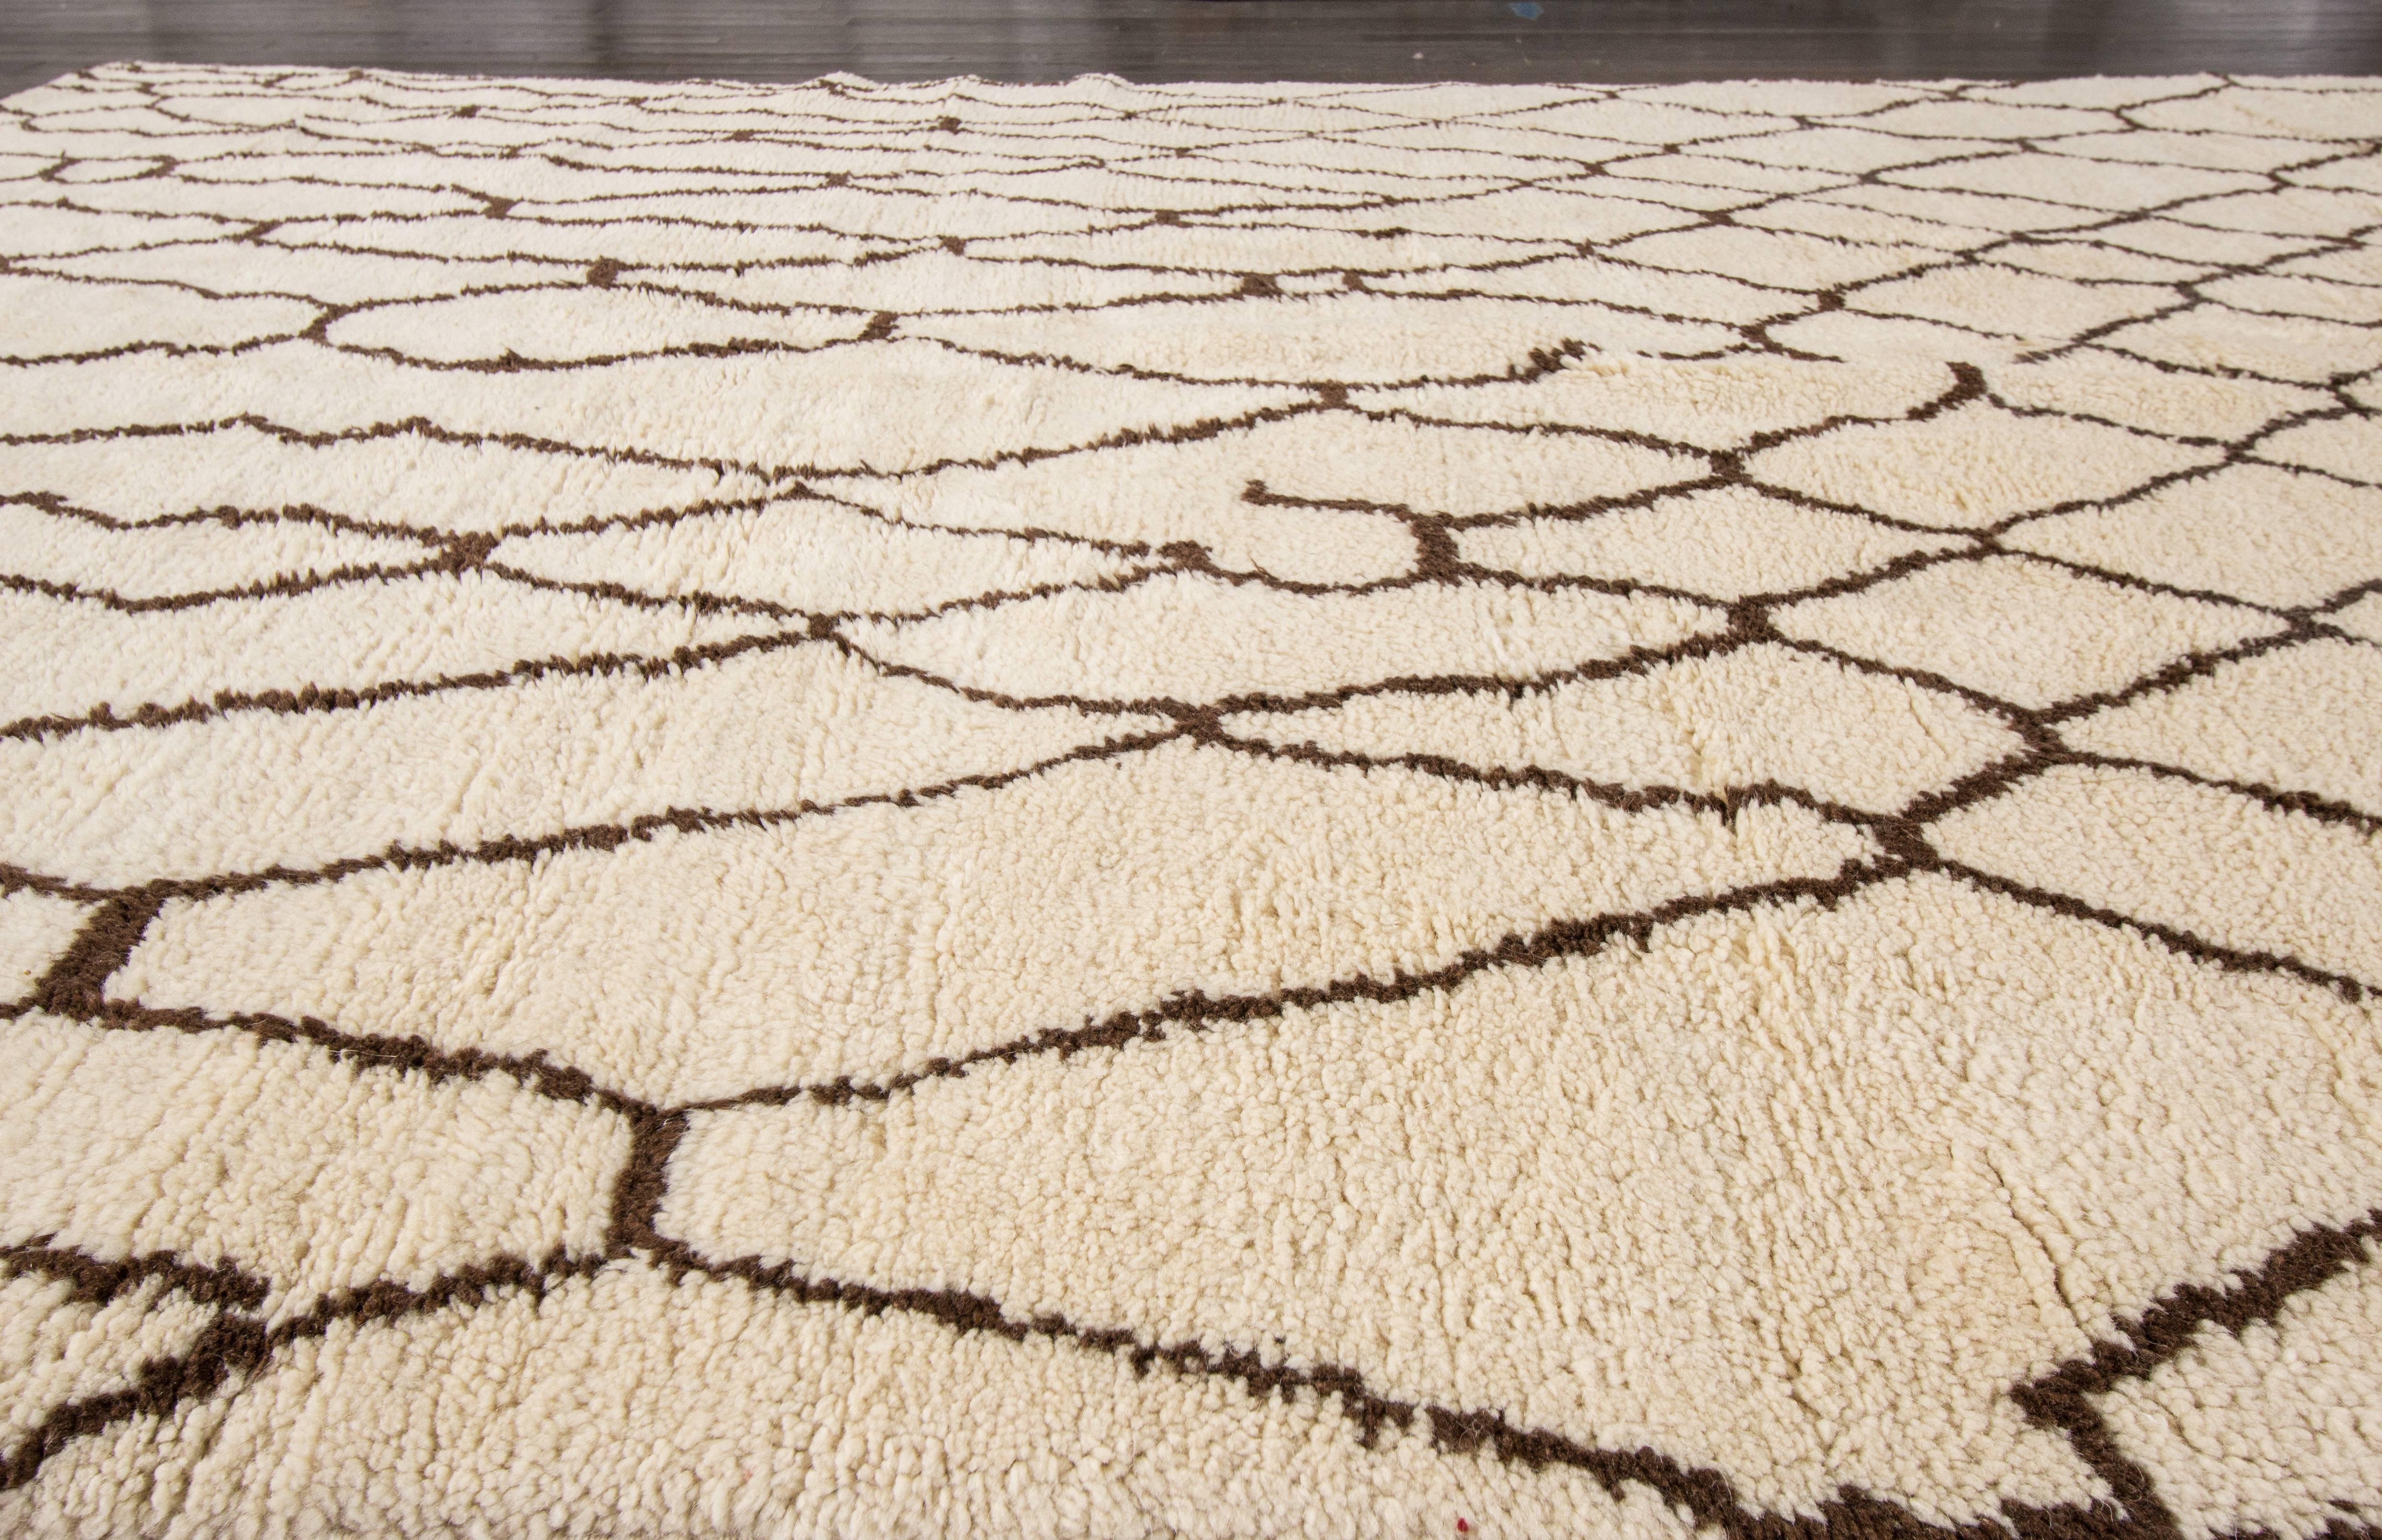 Contemporary 21st century cMoroccan rug with an ivory field and dark brown design. No border, extra-thick pile, measures approximately 8 feet 2 inches by 10 feet.